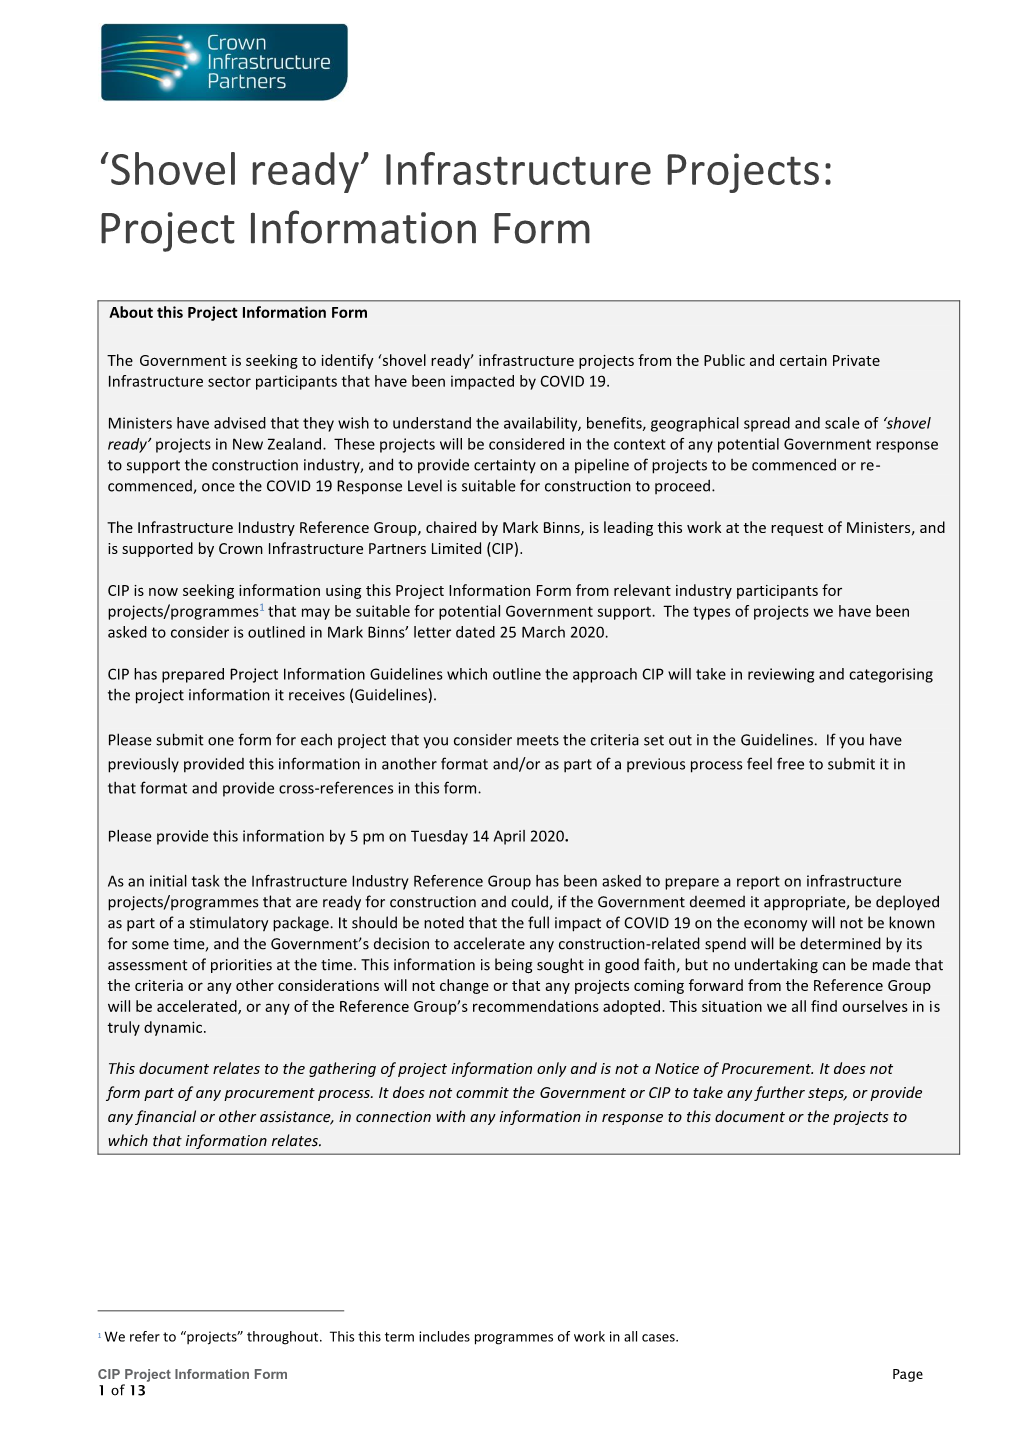 'Shovel Ready' Infrastructure Projects: Project Information Form